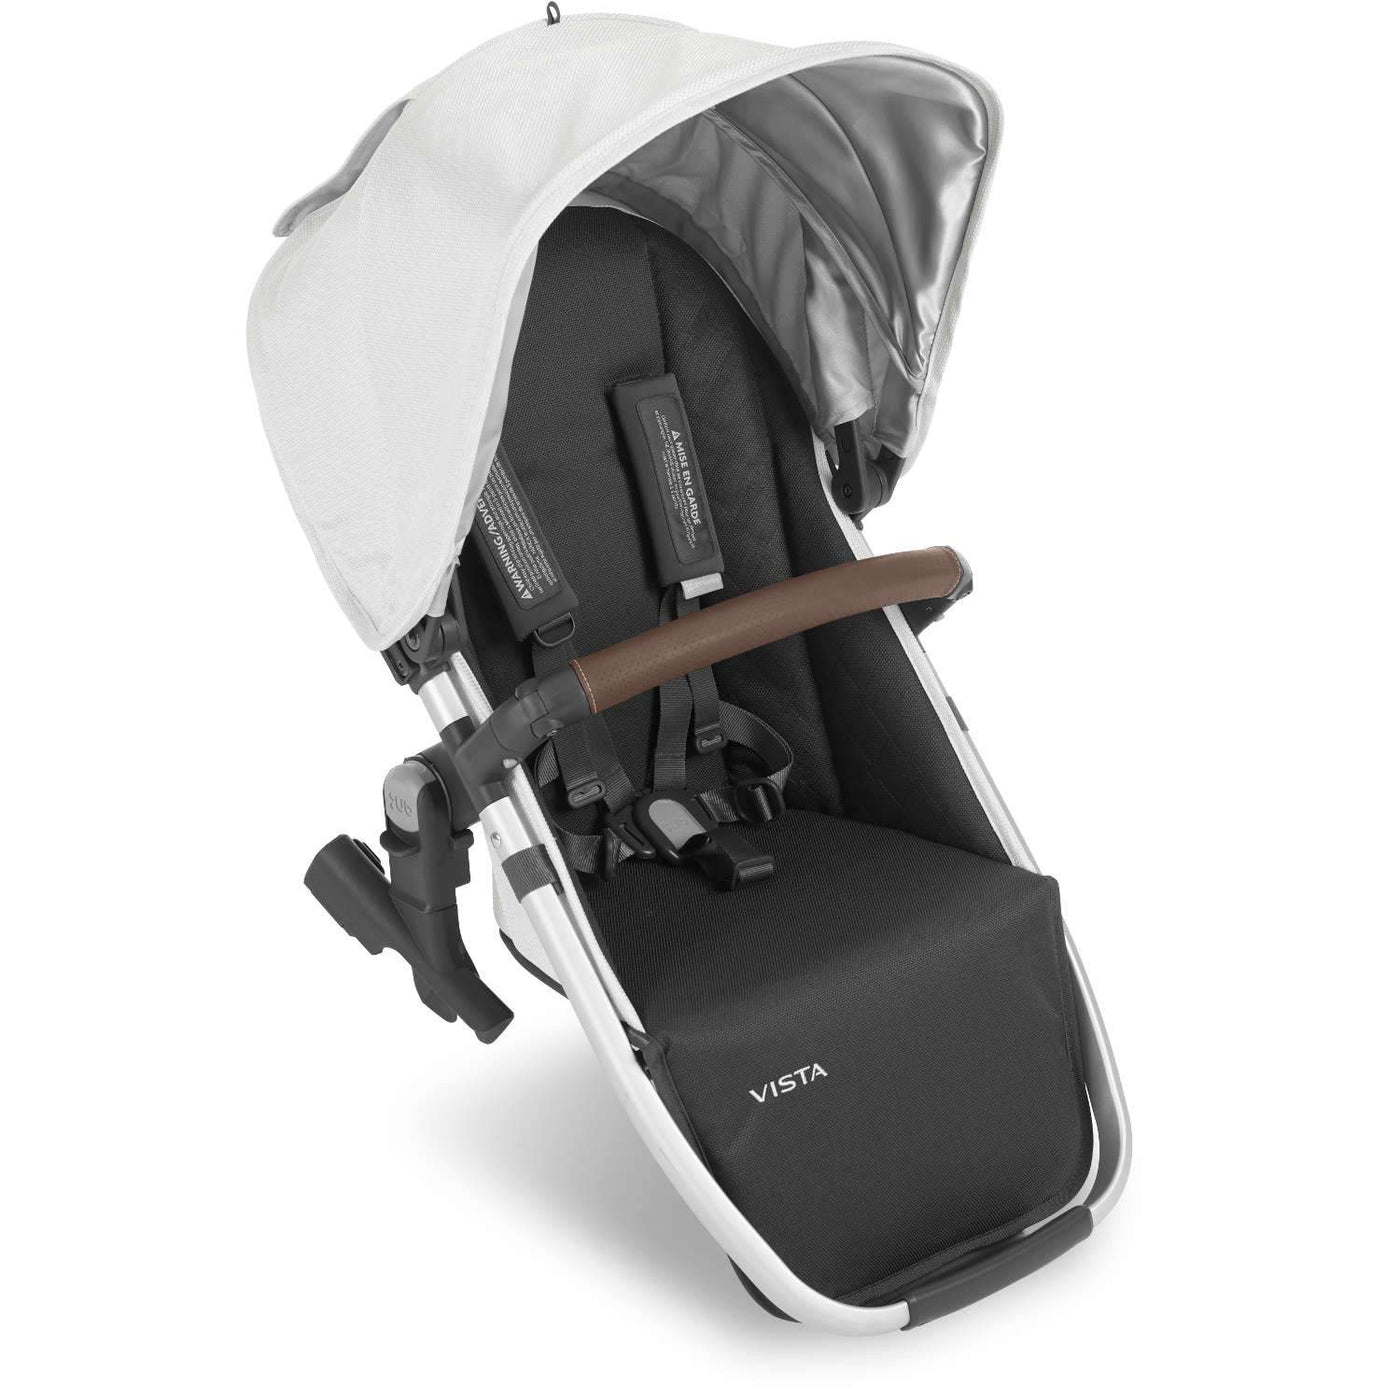 uppababy stroller rumble seat